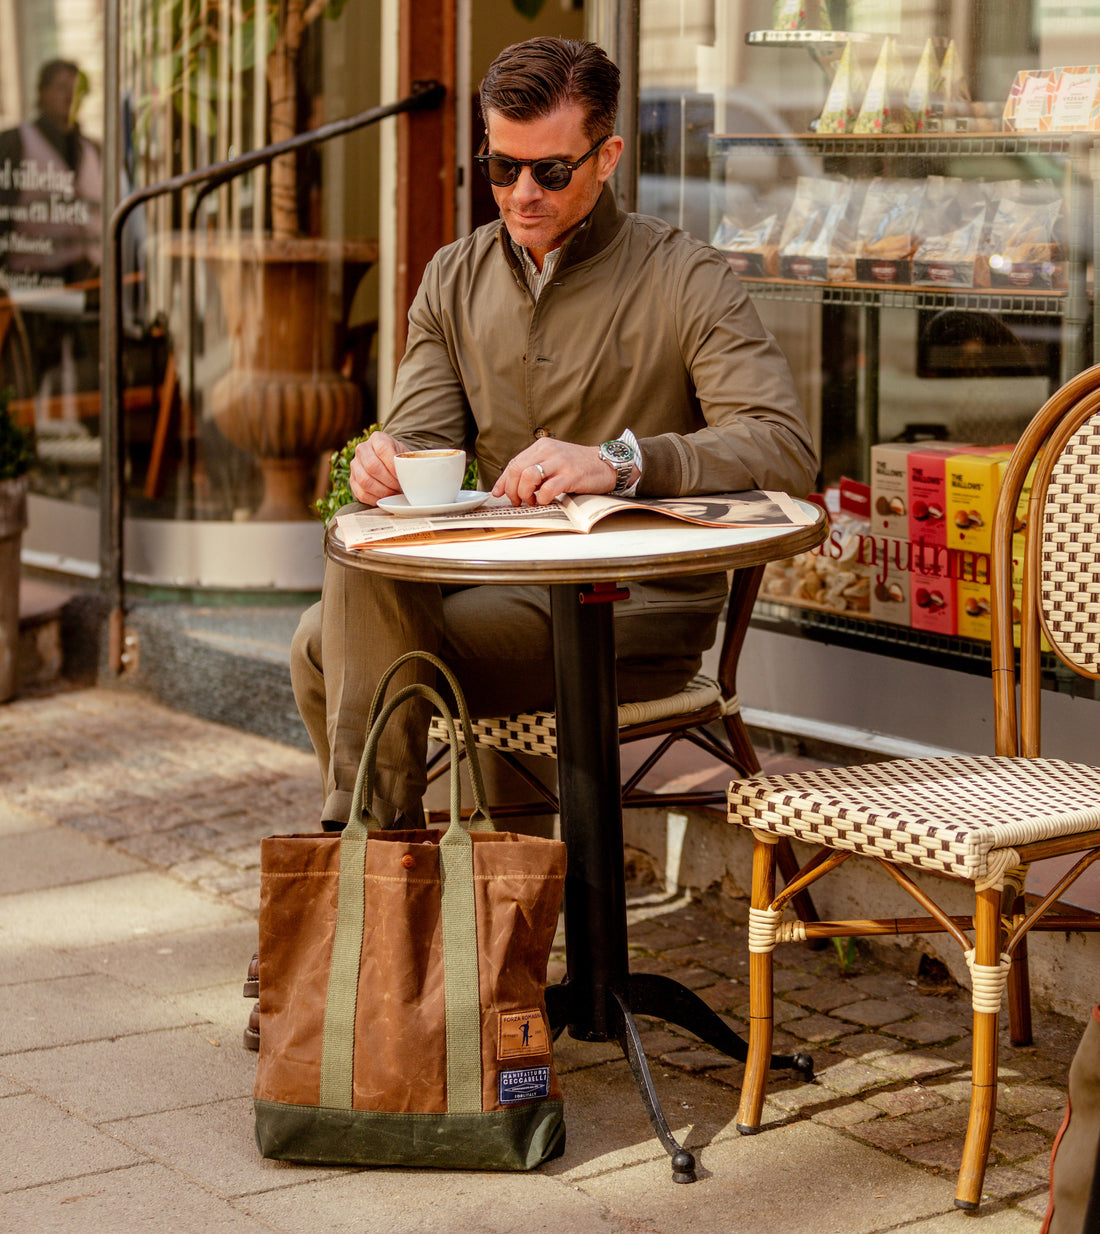 Man in sunglasses sitting at a café table, sipping coffee and reading a newspaper, with shopping bags at his side.